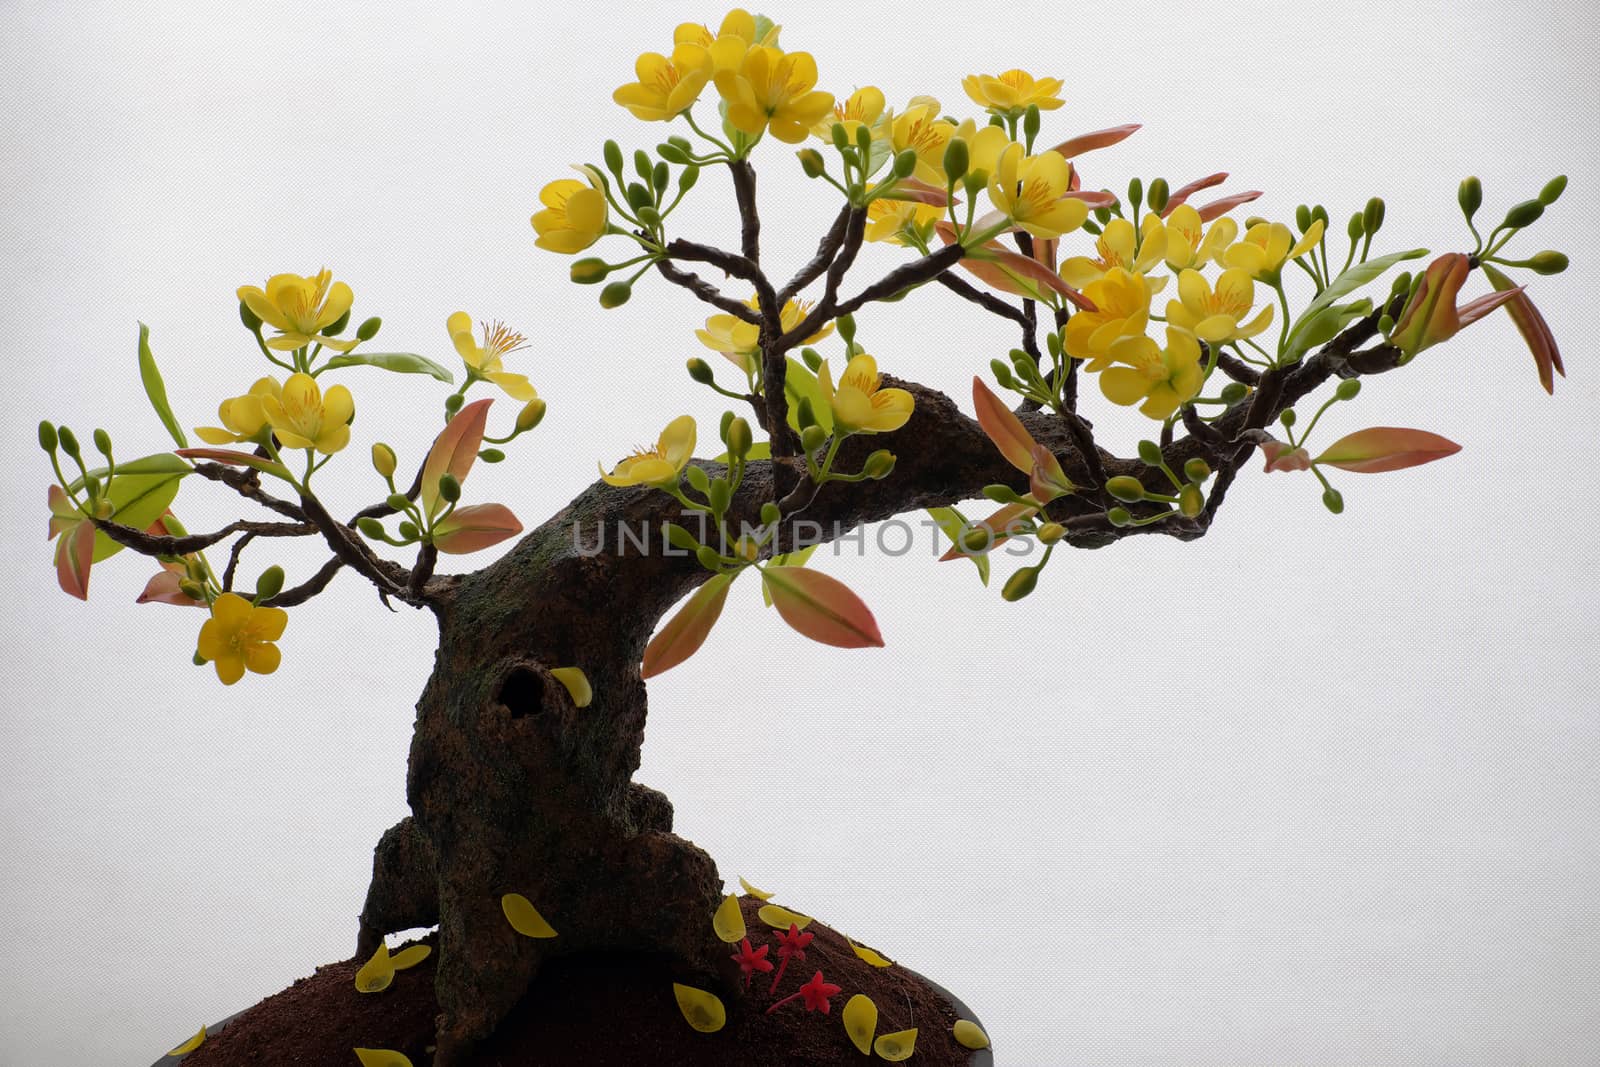 Vietnam spring flower, clay apricot blossom by xuanhuongho